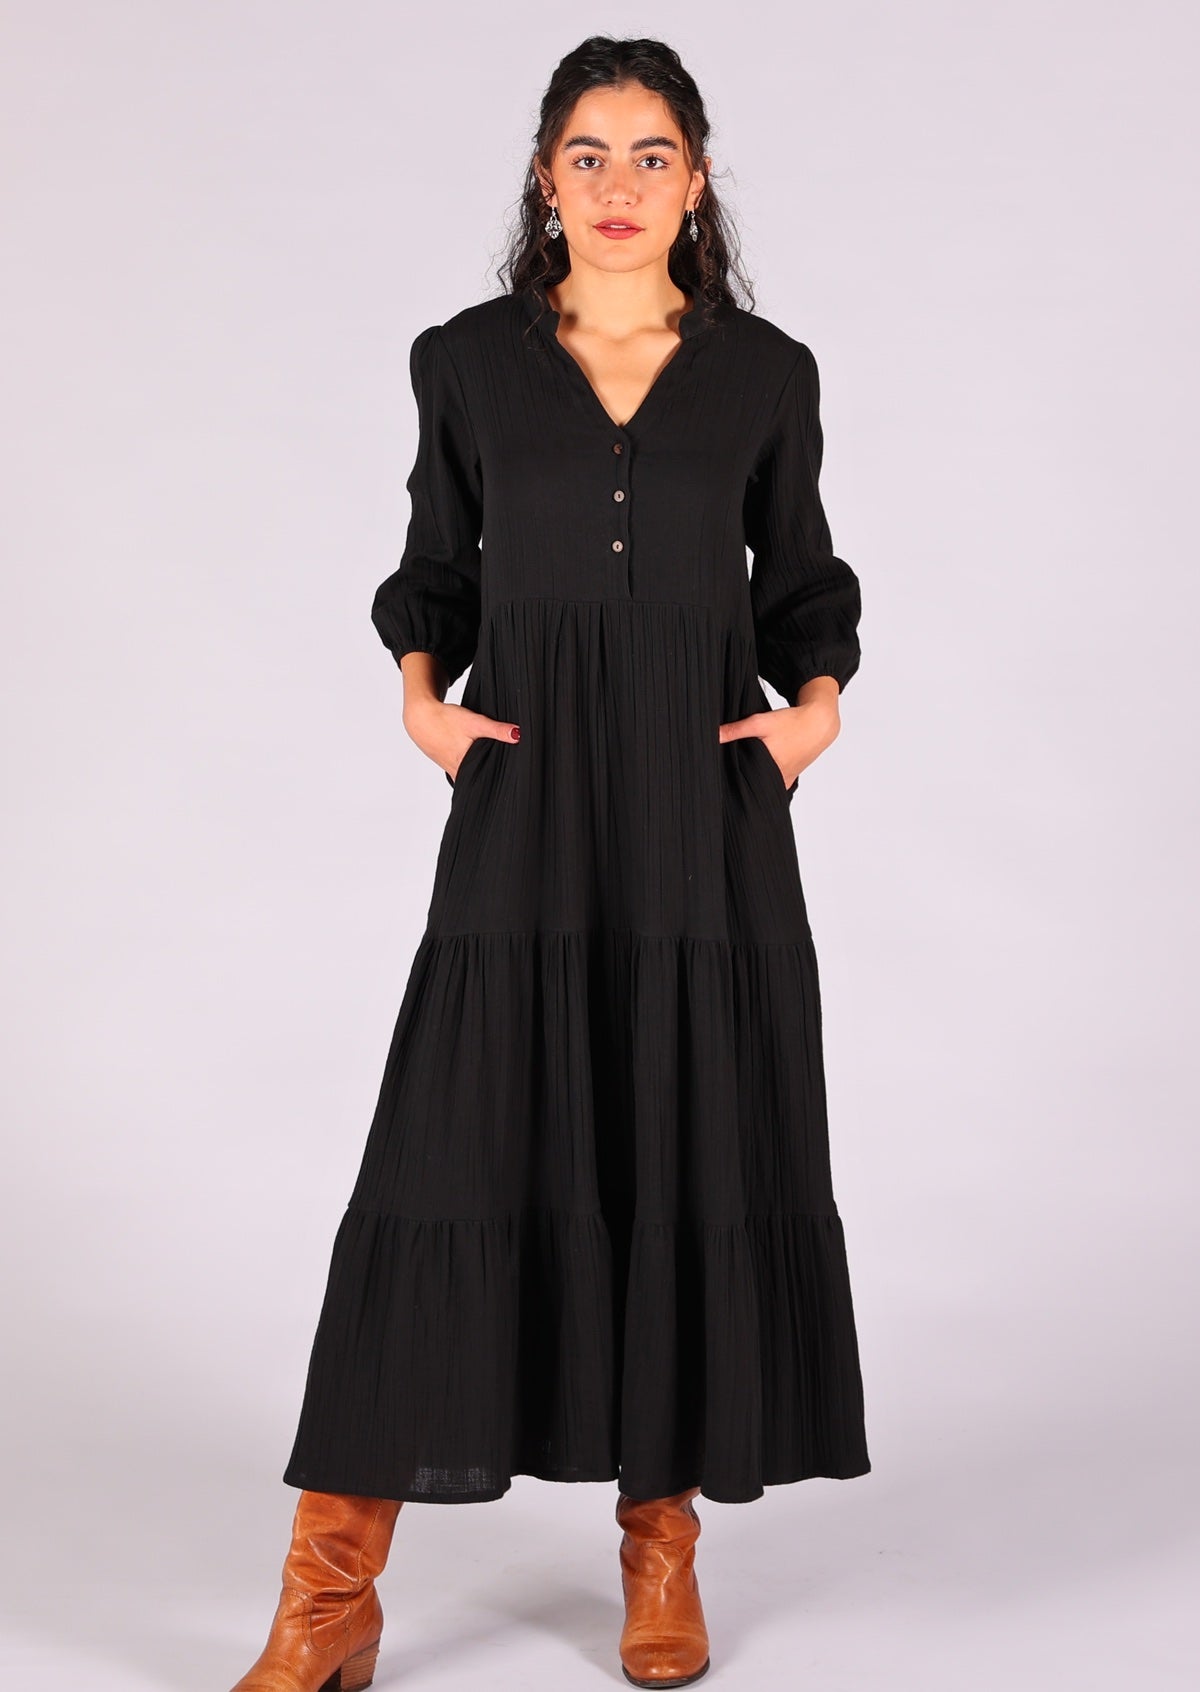 Model poses in double cotton tiered maxi dress with hidden side pockets